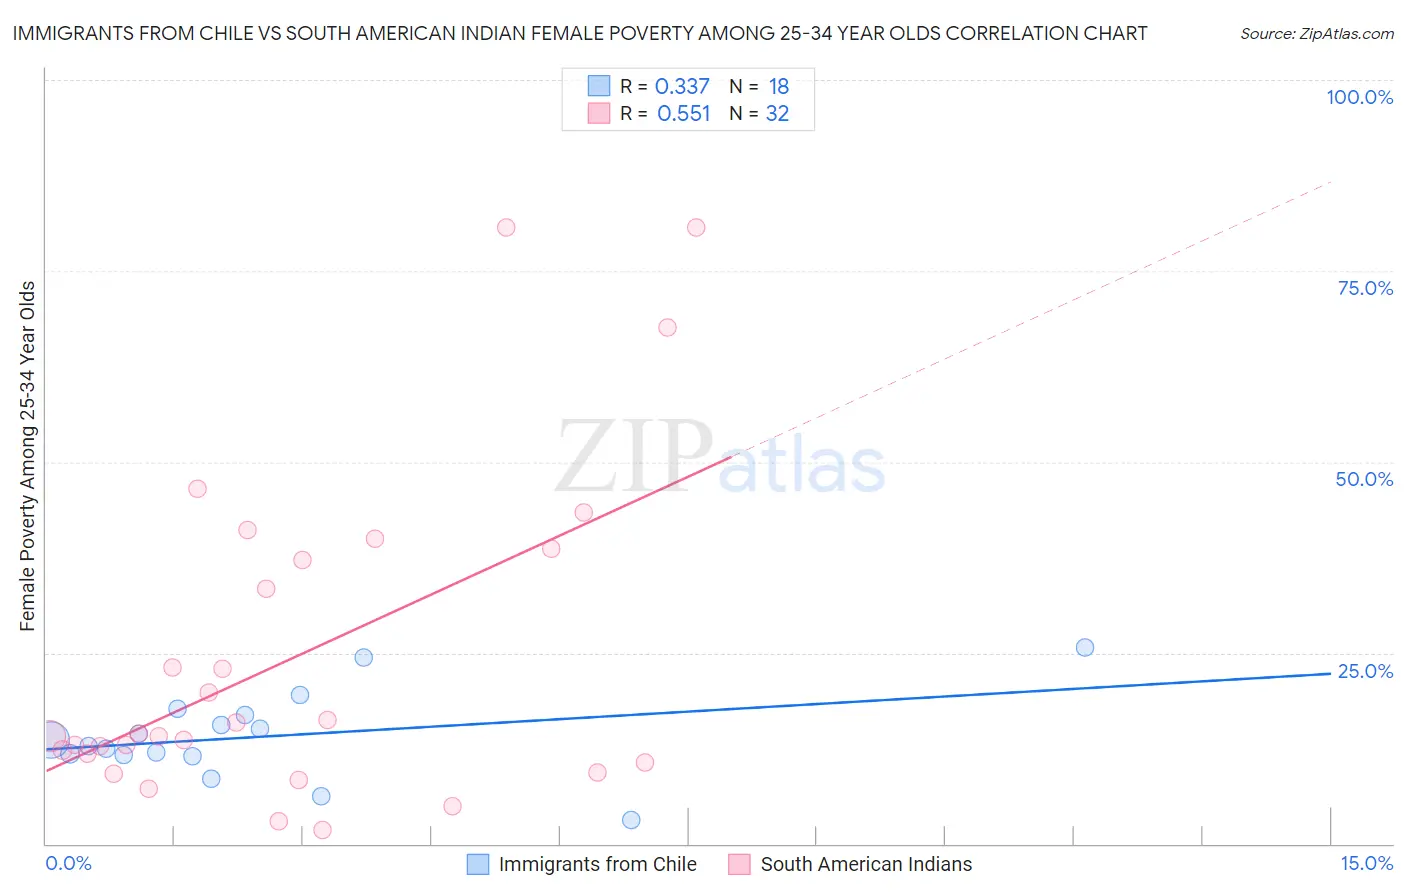 Immigrants from Chile vs South American Indian Female Poverty Among 25-34 Year Olds